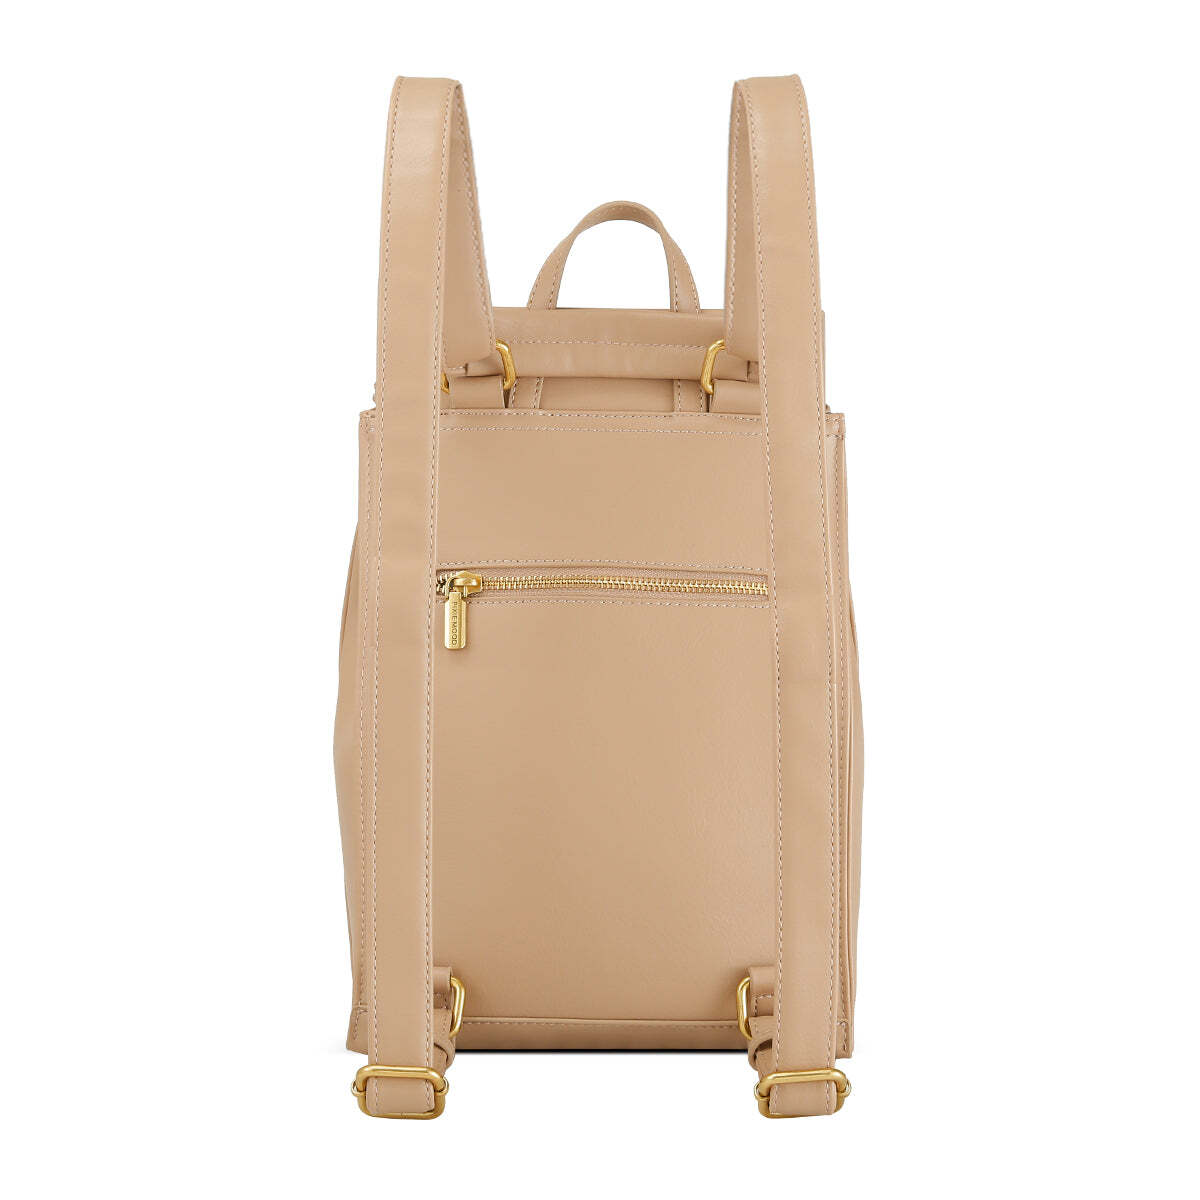 PM Kim BackPack Sand Recycled